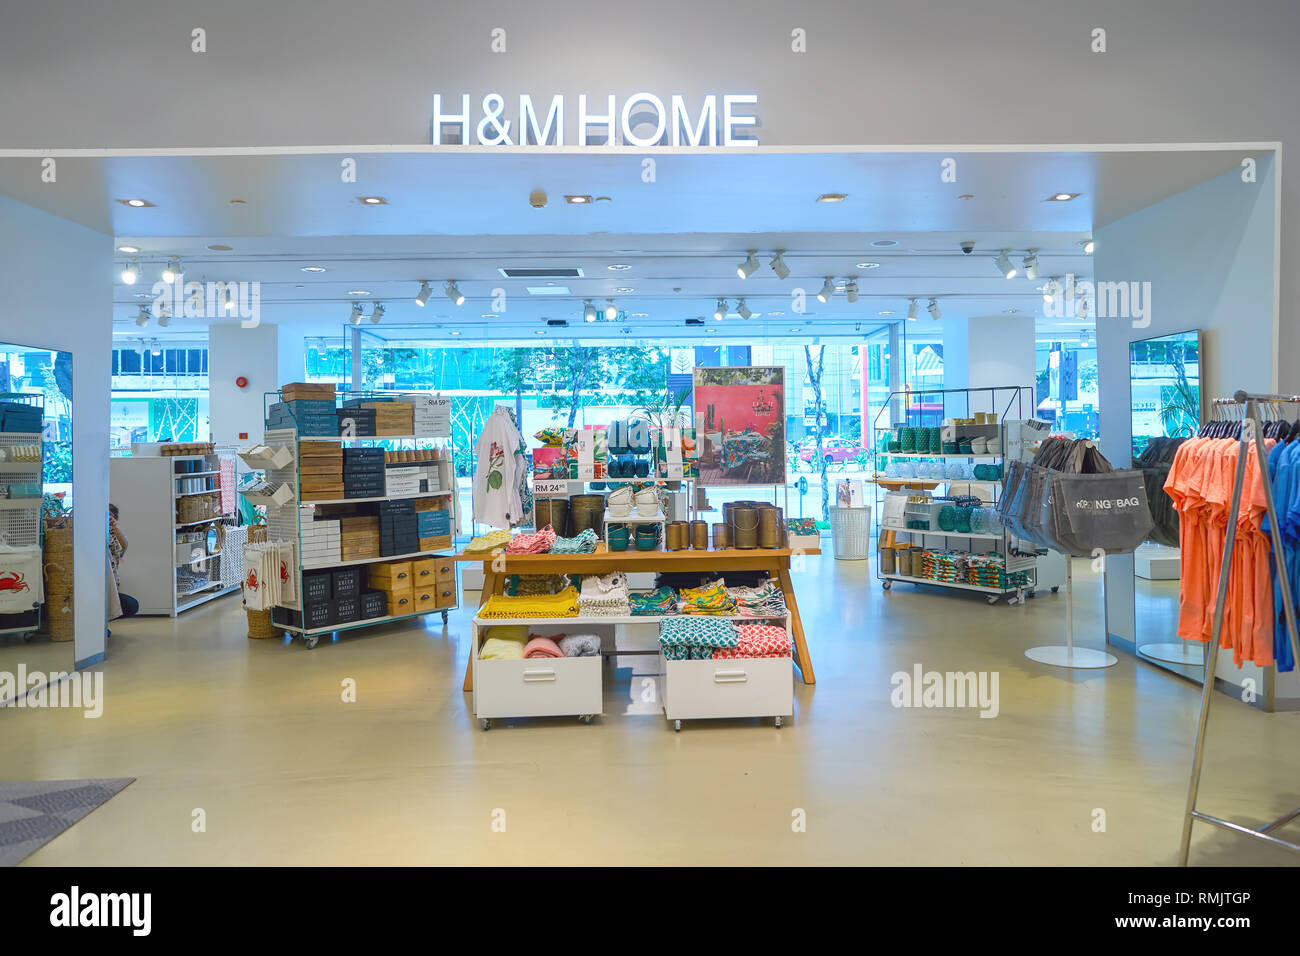 H&m home malaysia outlet